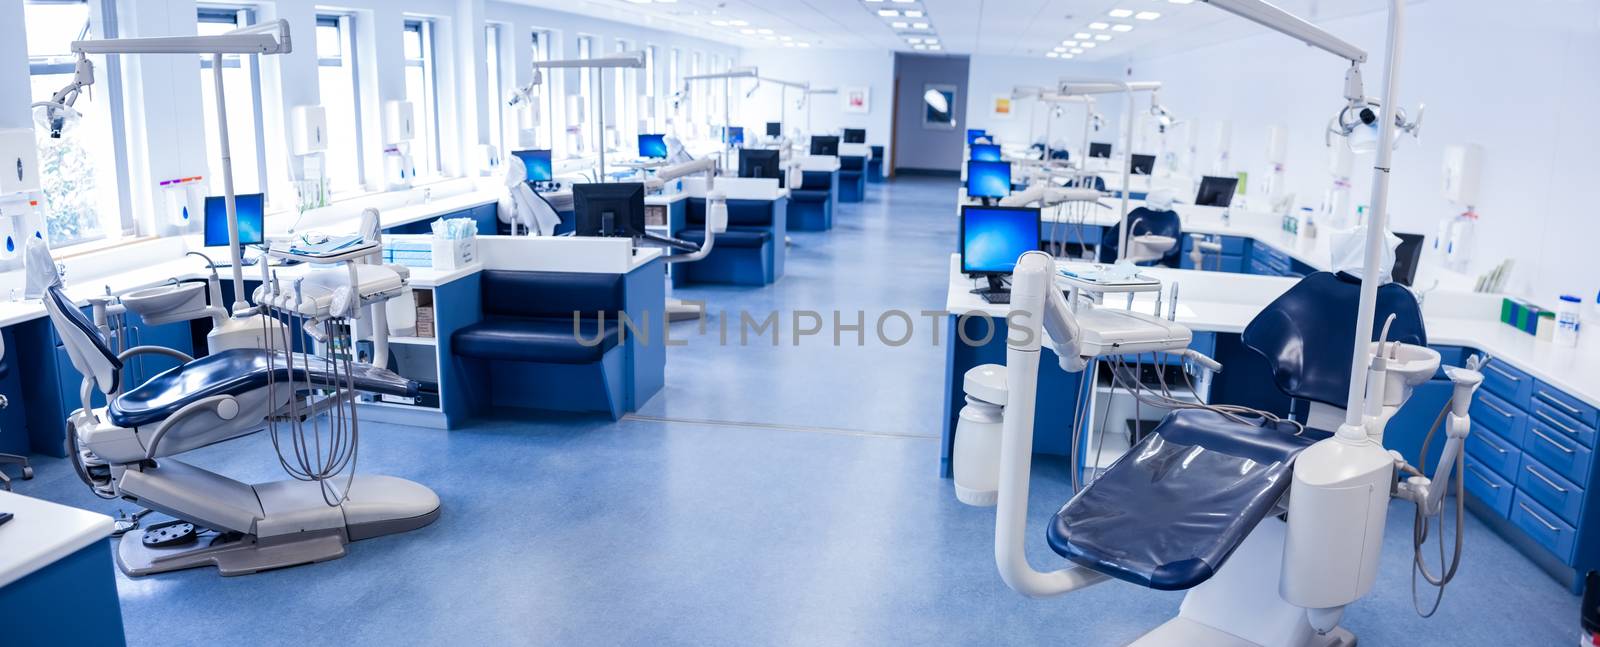 Inside of the clinic with dentists chairs at the dental hospital 